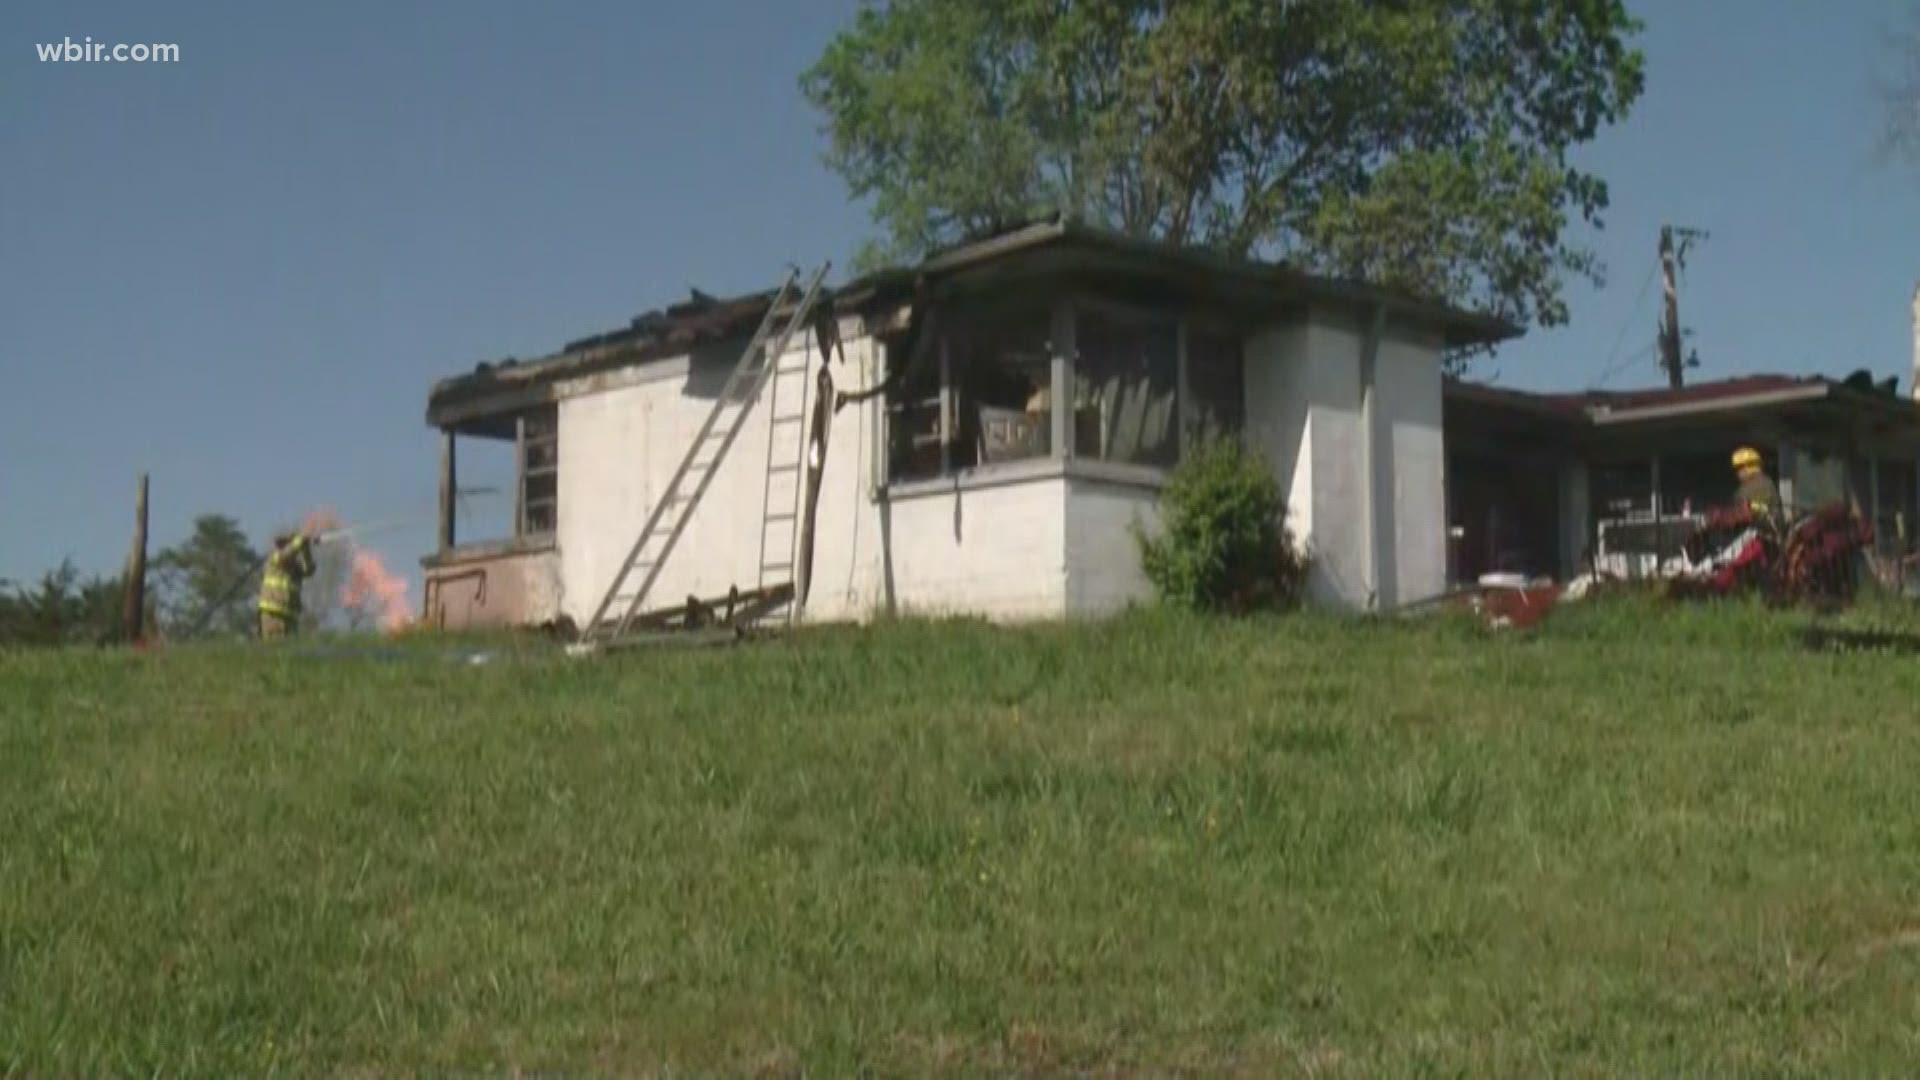 A Rural Metro firefighter is in the hospital after a house fire off Asheville Highway.